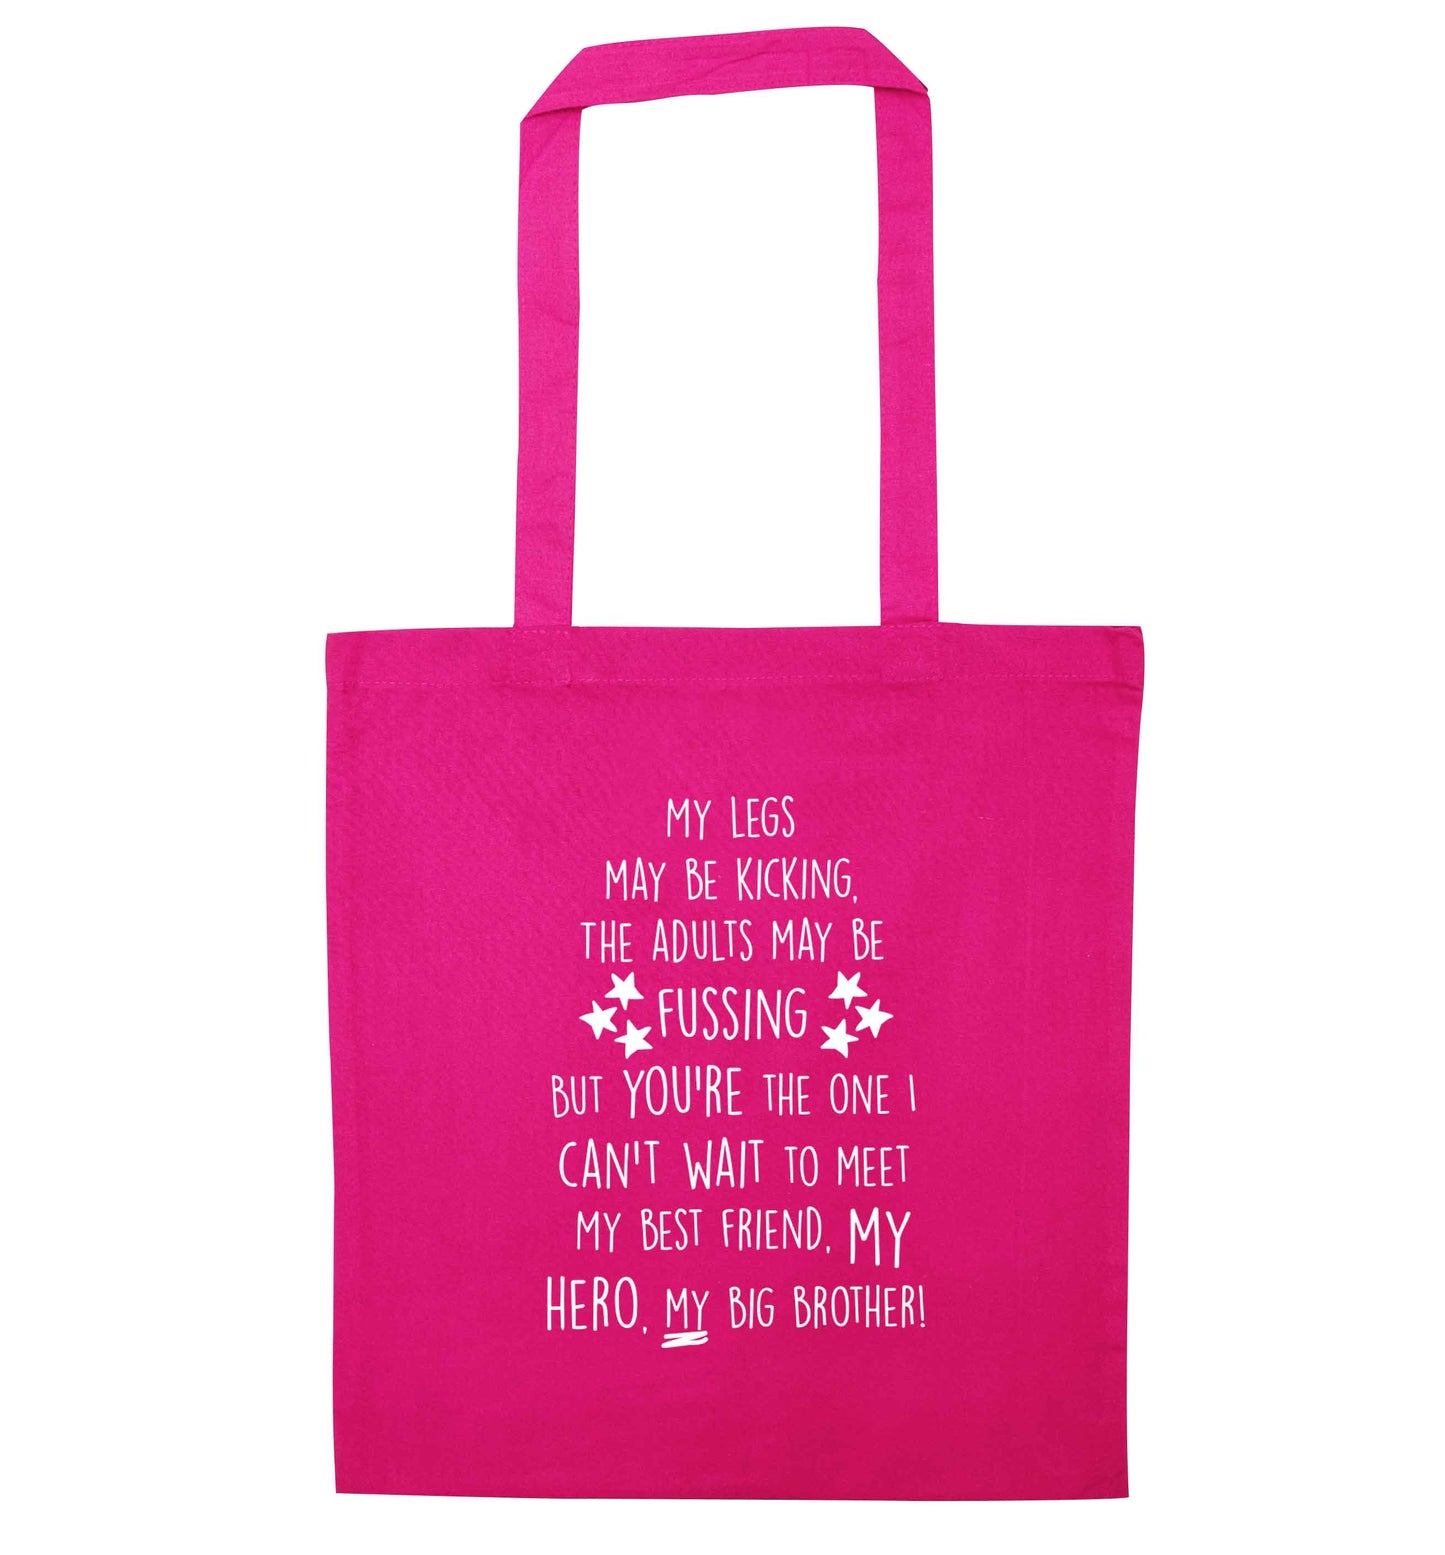 A poem from bump to big brother pink tote bag